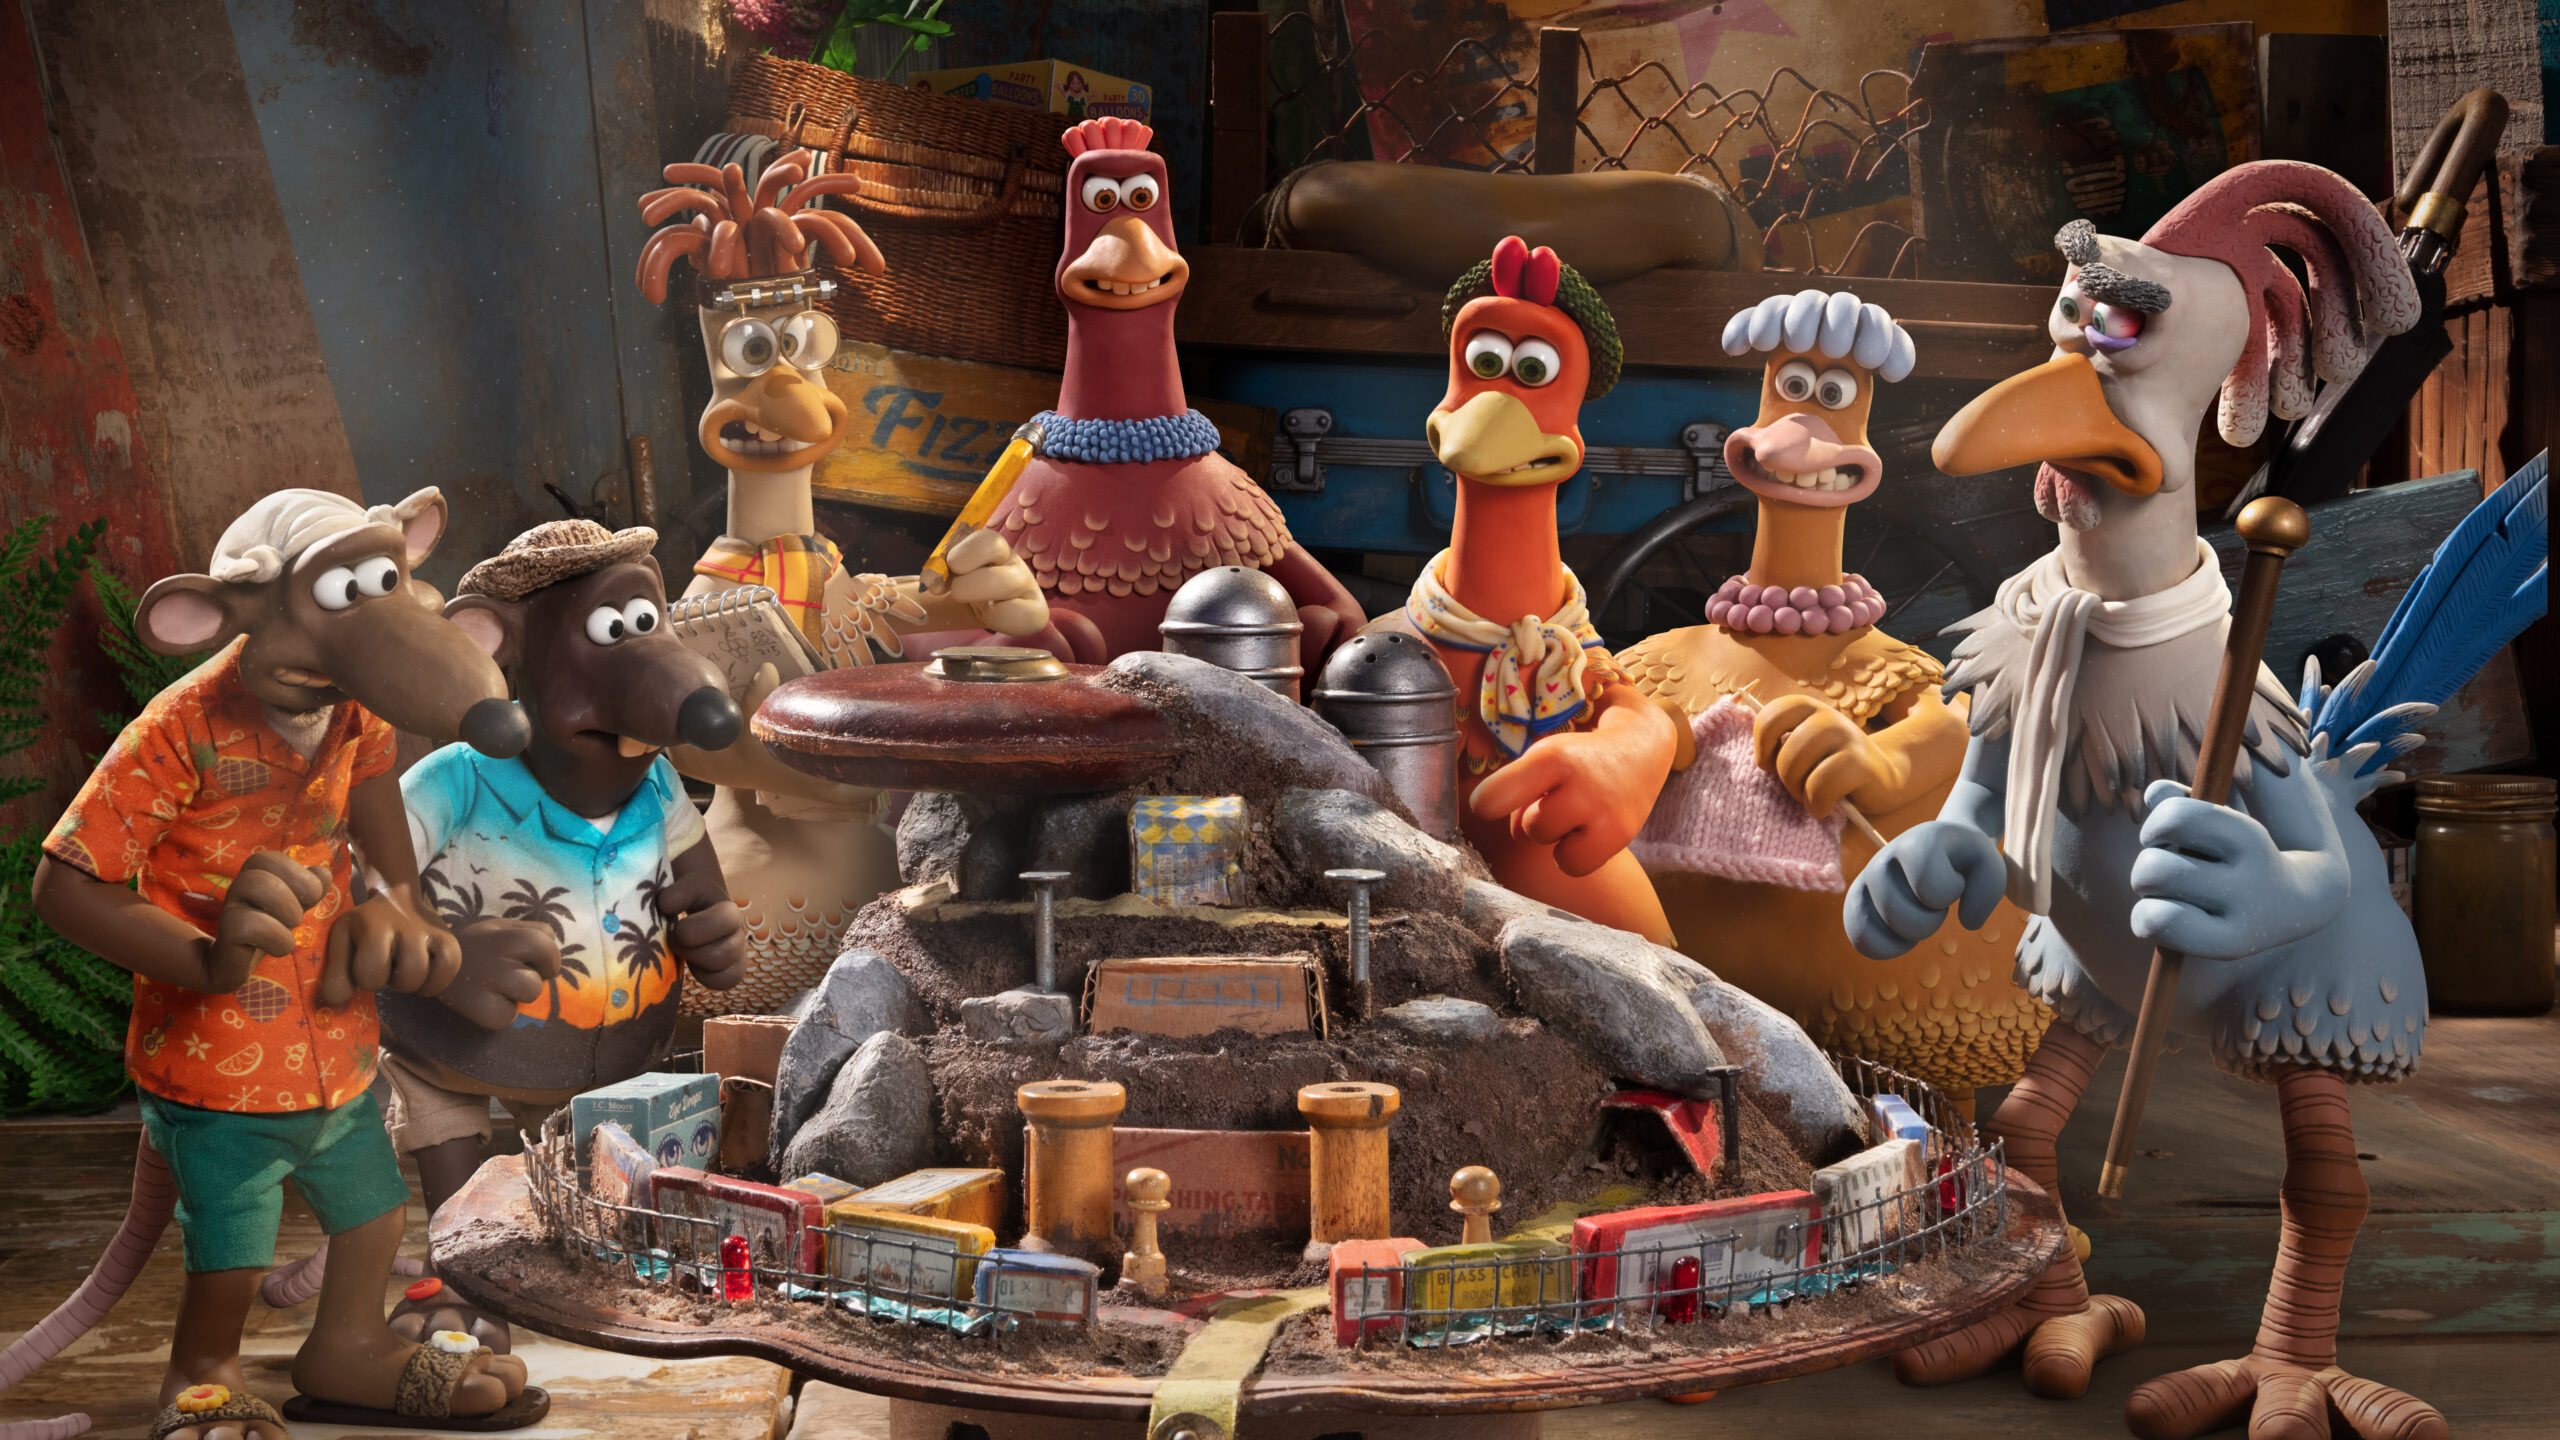 CHICKEN RUN: DAWN OF THE NUGGET - (L to R): Fetcher (Daniel Mays), Nick (Romesh Ranganathan), Mac (Lynn Ferguson), Bunty (Imelda Staunton), Ginger (Thandiwe Newton), Babs (Jane Horrocks) and Fowler (David Bradley). The world's greatest hens-emble are back and hatching a plan in Chicken Run: Dawn of the Nugget - the eagerly anticipated sequel to Aardman's hit film Chicken Run. Chicken Run: Dawn of the Nugget will make its debut later this year, only on Netflix.CHICKEN RUN: DAWN OF THE NUGGET will make its debut only on Netflix in 2023. Cr: Aardman/NETFLIX © 2023